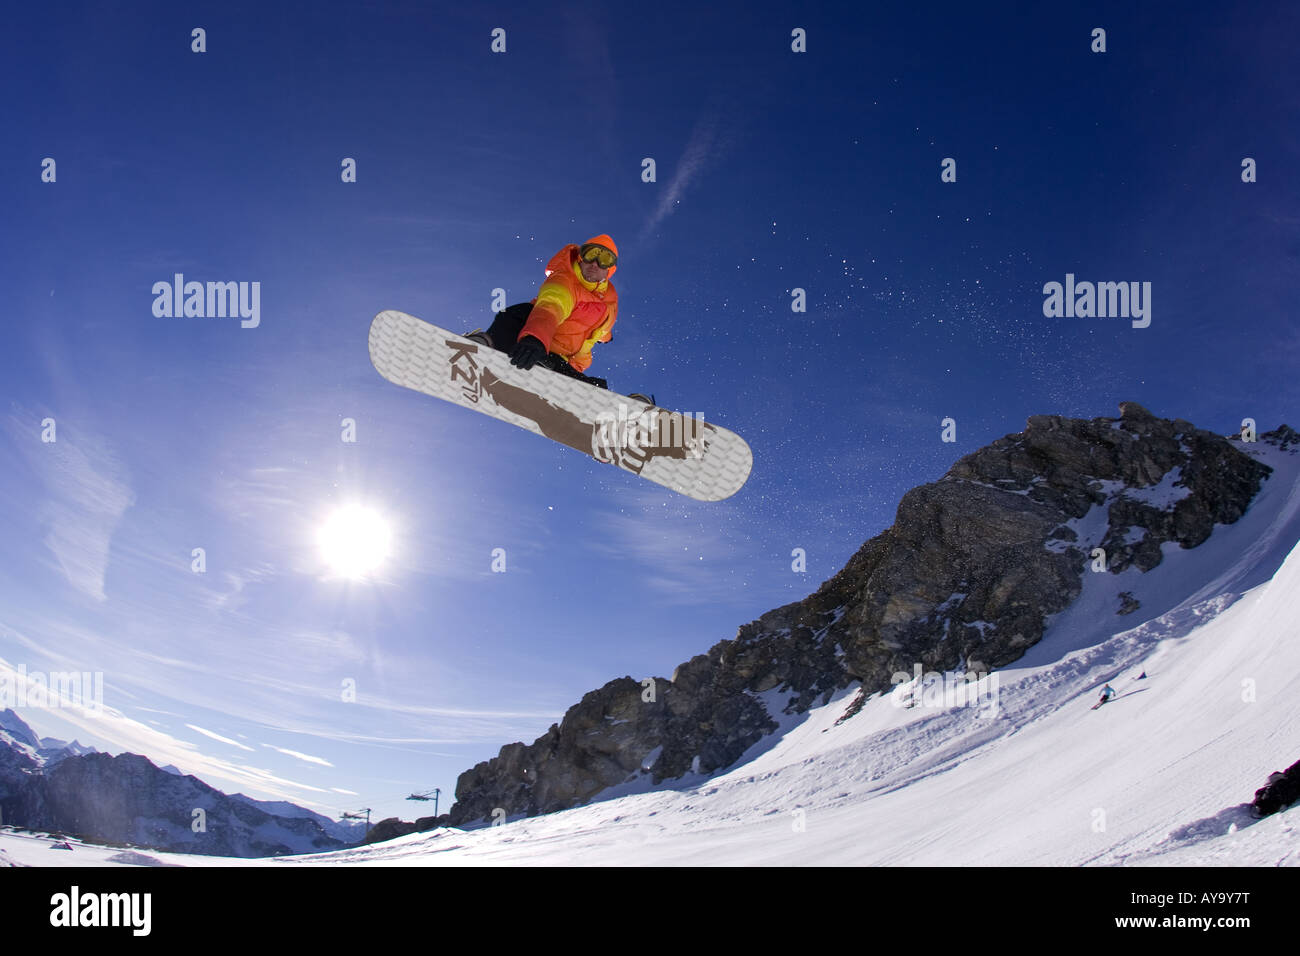 Snowboarder in mid air jump, Tignes, France Stock Photo